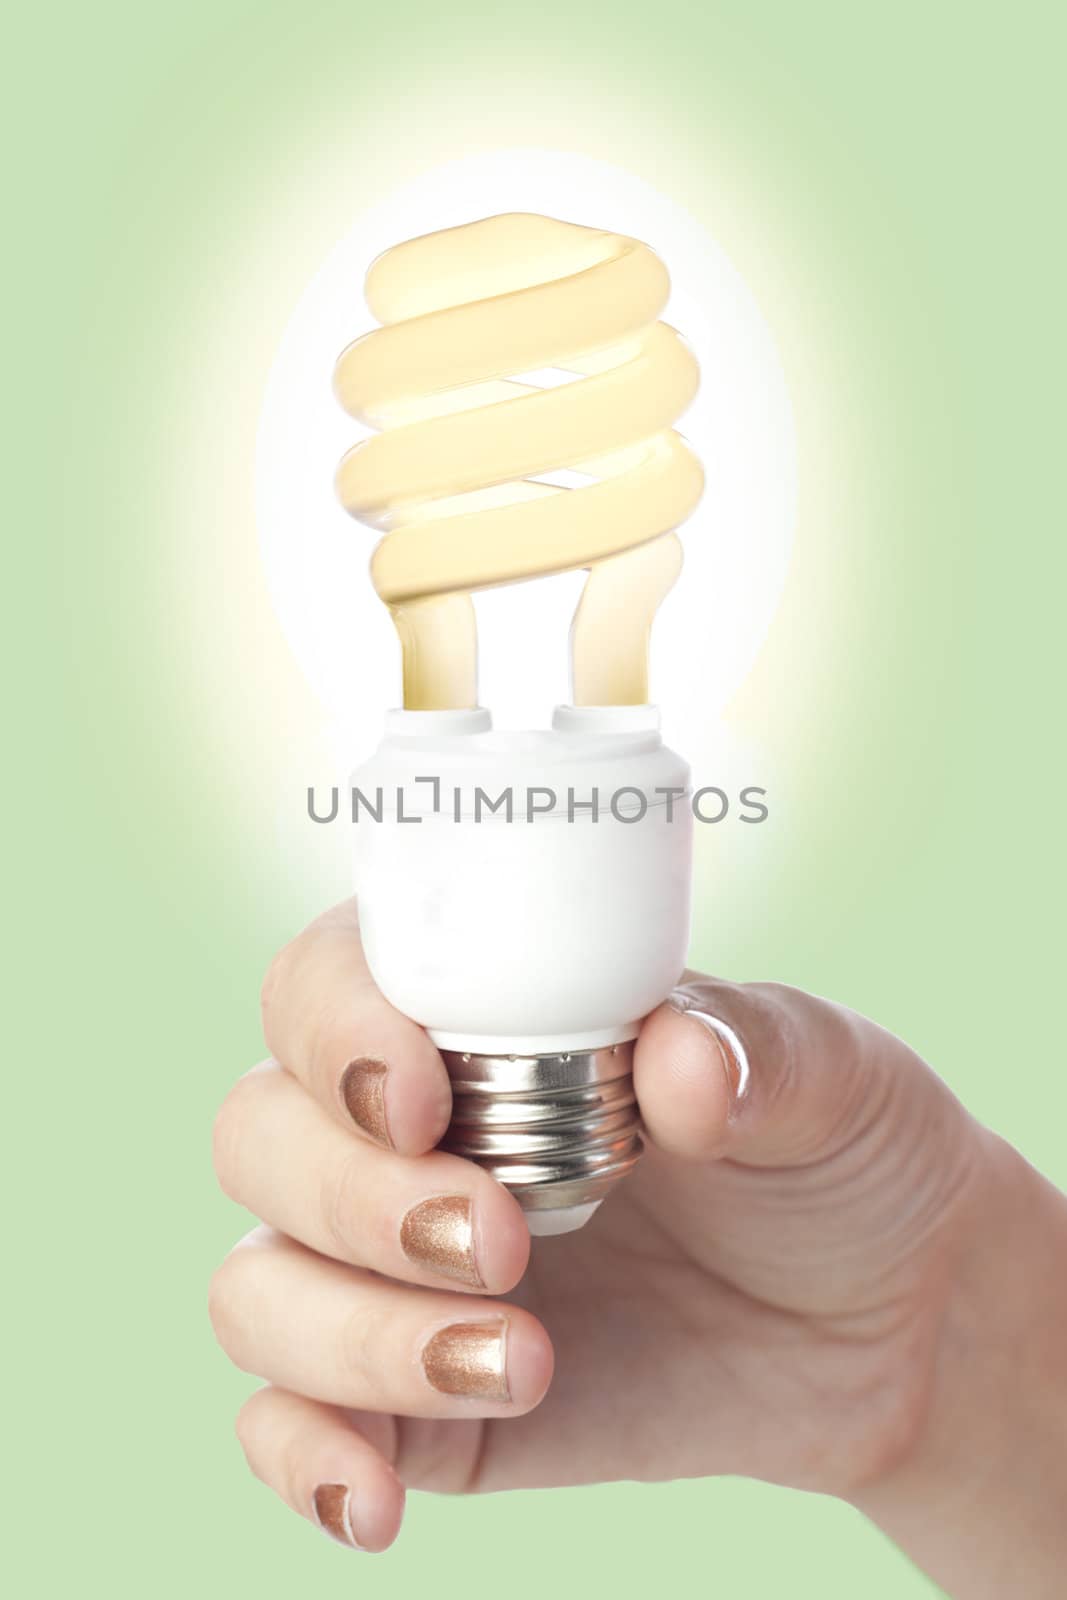 Close-up image of a hand holding a glowing fluorescent bulb isolated on a green background